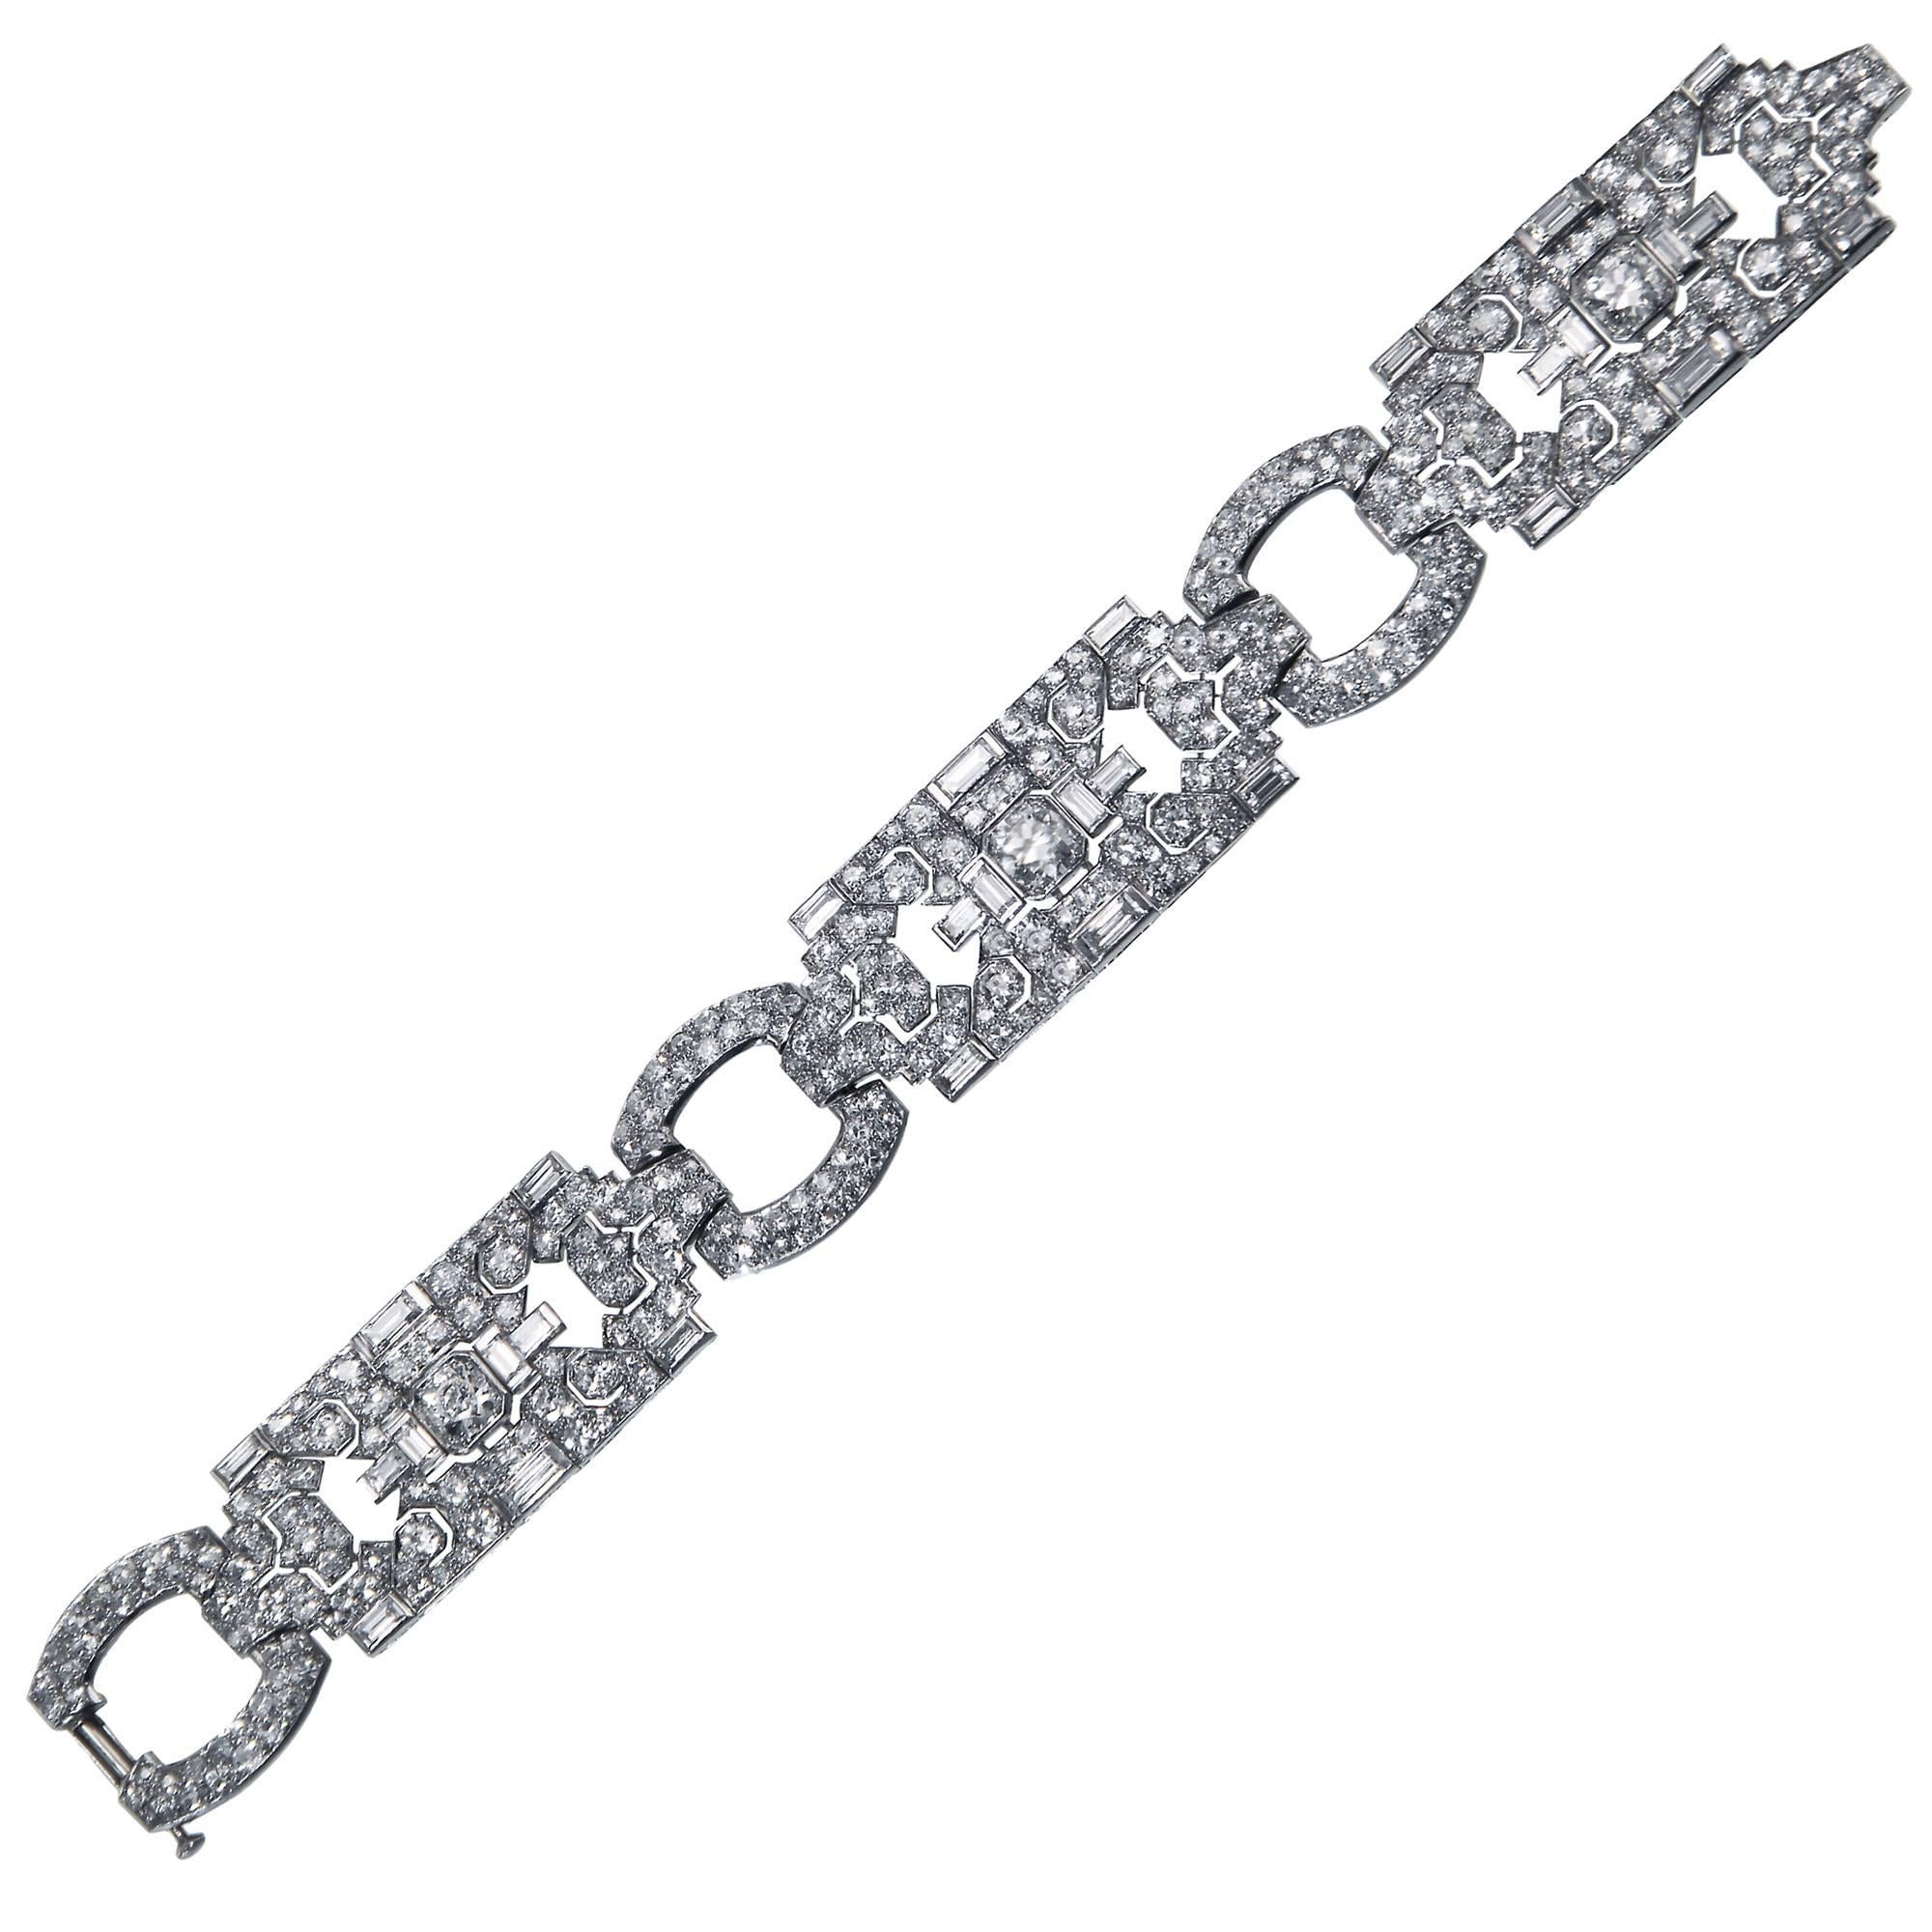 This beautiful Cartier French Art Deco bracelet is magnificently handcrafted and contains approximately 20cts of mixed cut diamonds. Founded in Paris in 1847, by Louis-Francois Cartier, the firm known as Cartier quickly became recognized for its